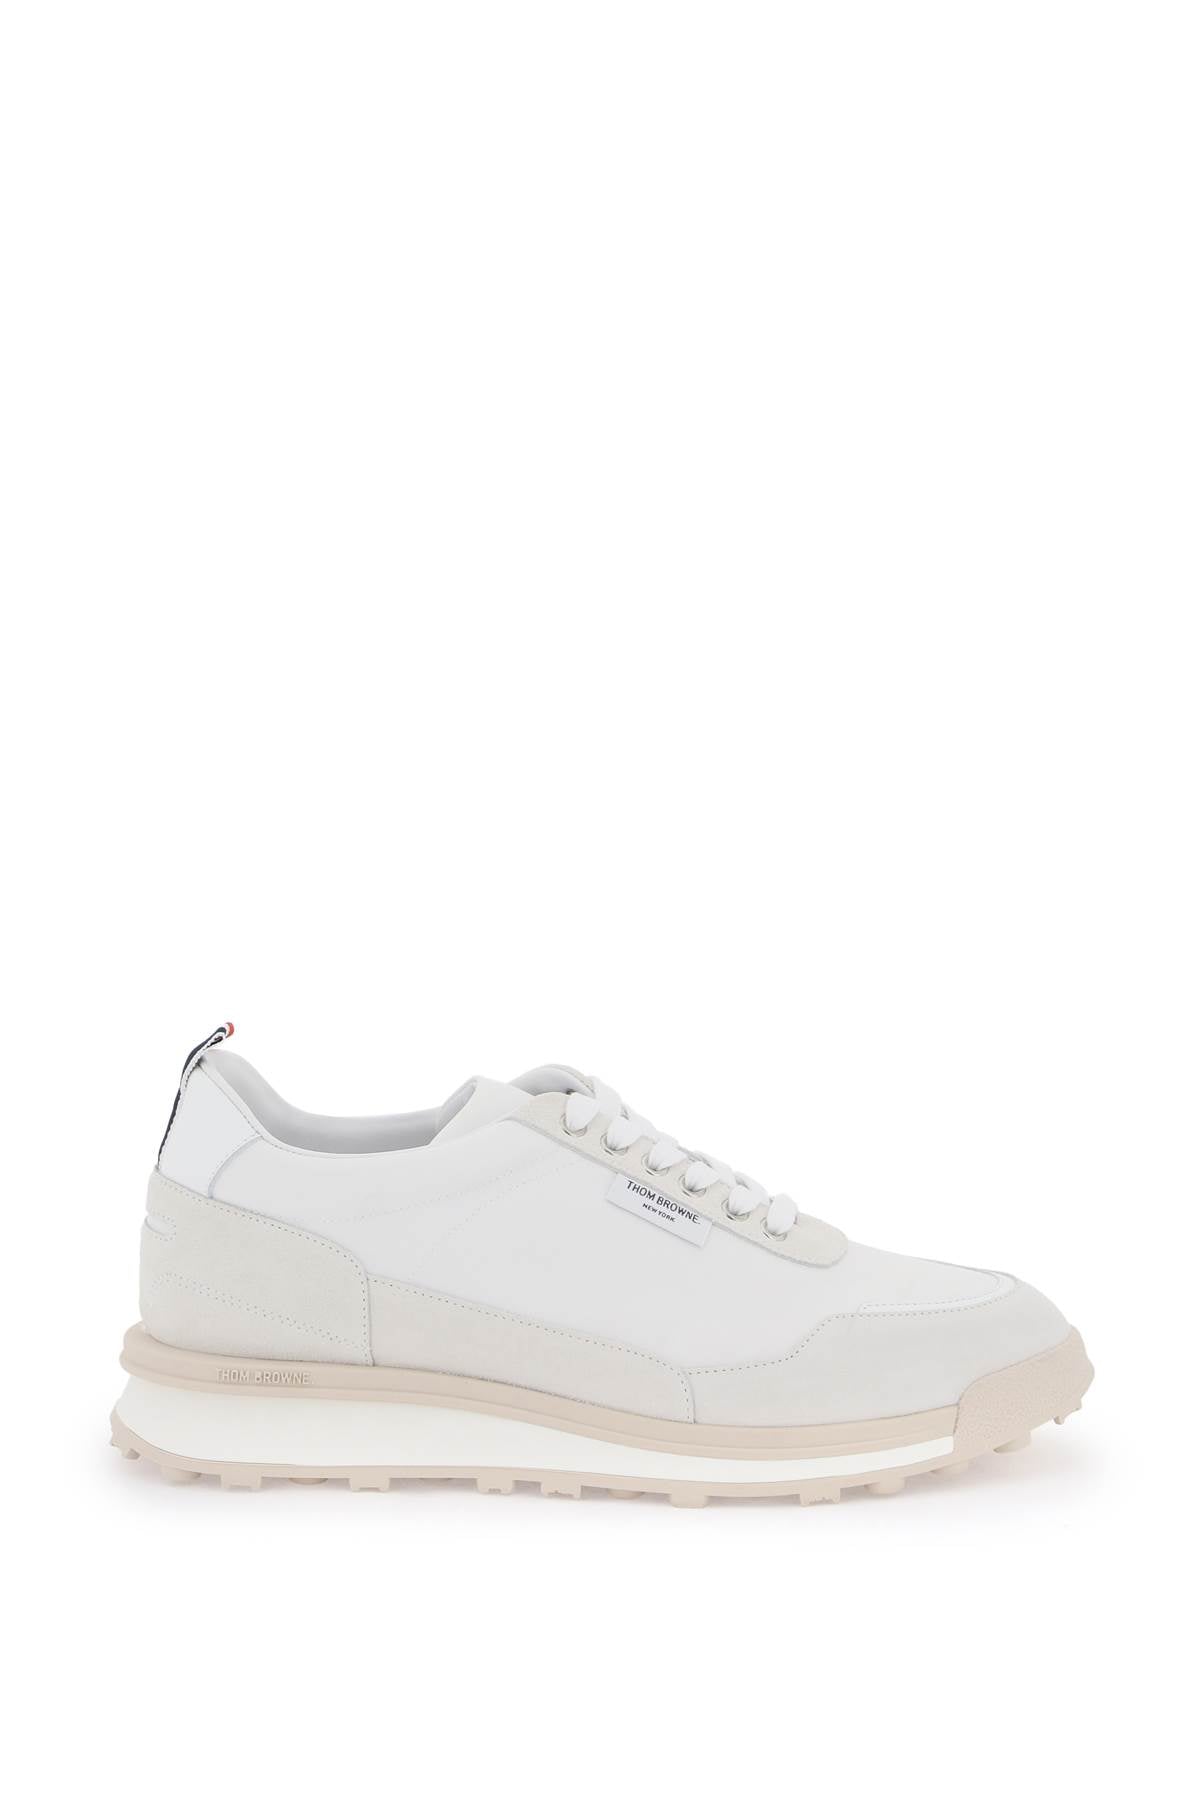 Thom Browne Men's White Sneakers With Colorful Grosgrain Detail